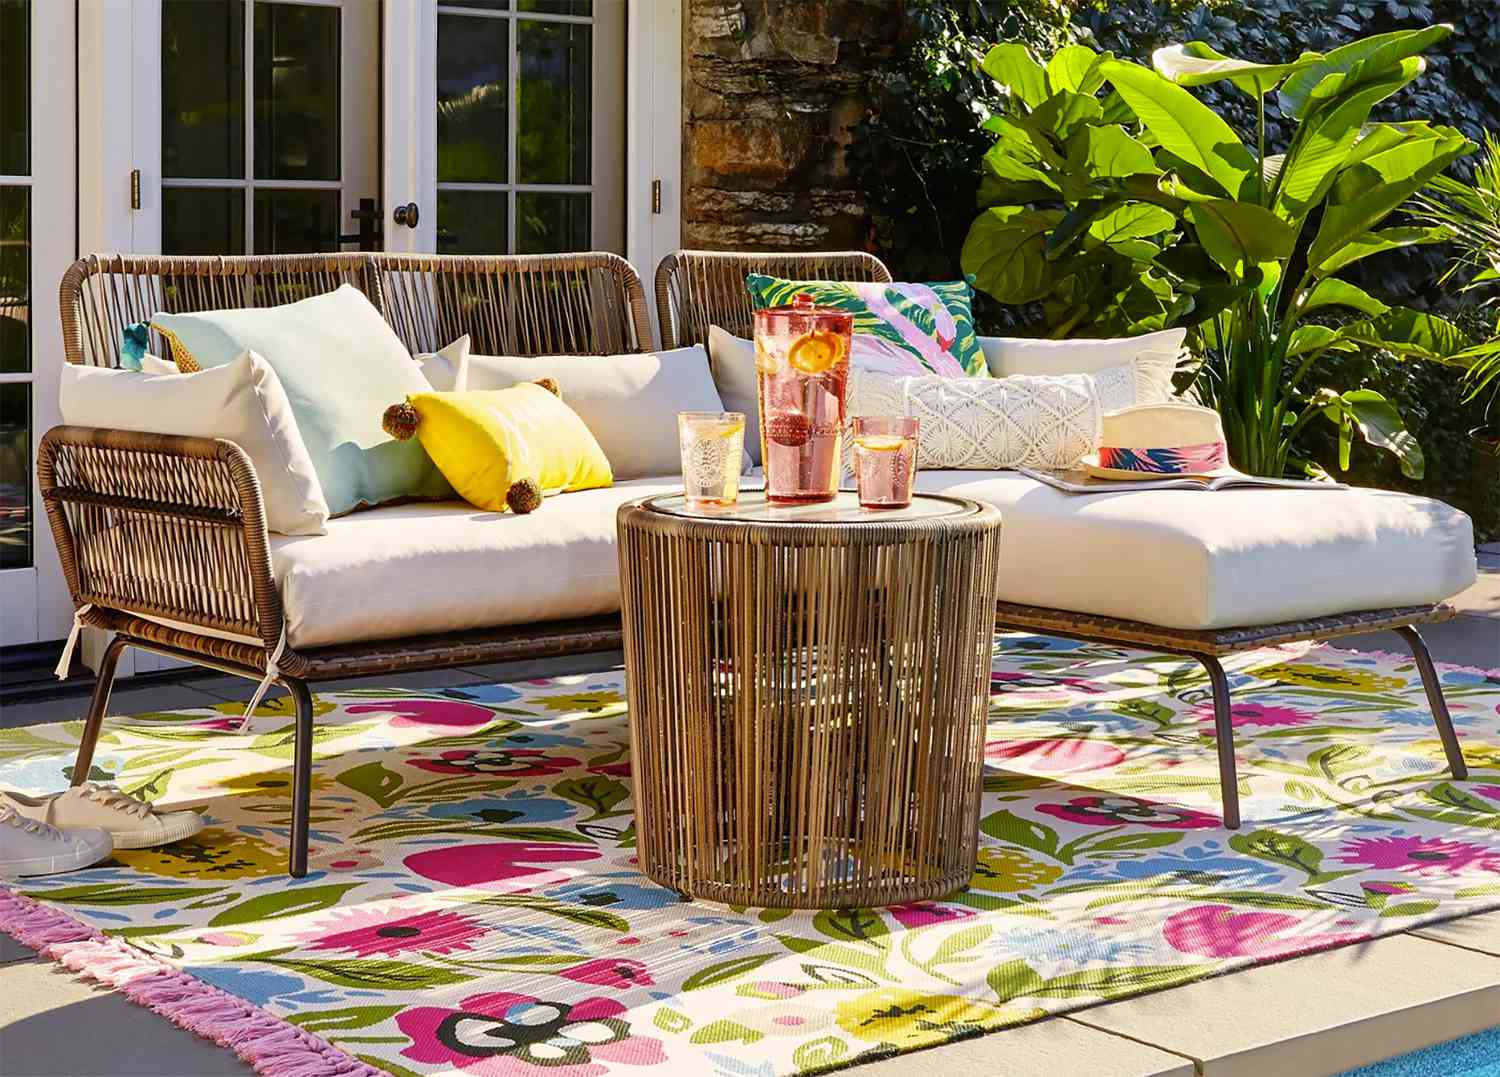 Outdoor Patio Furniture Sets At Target, Best Patio Conversation Sets